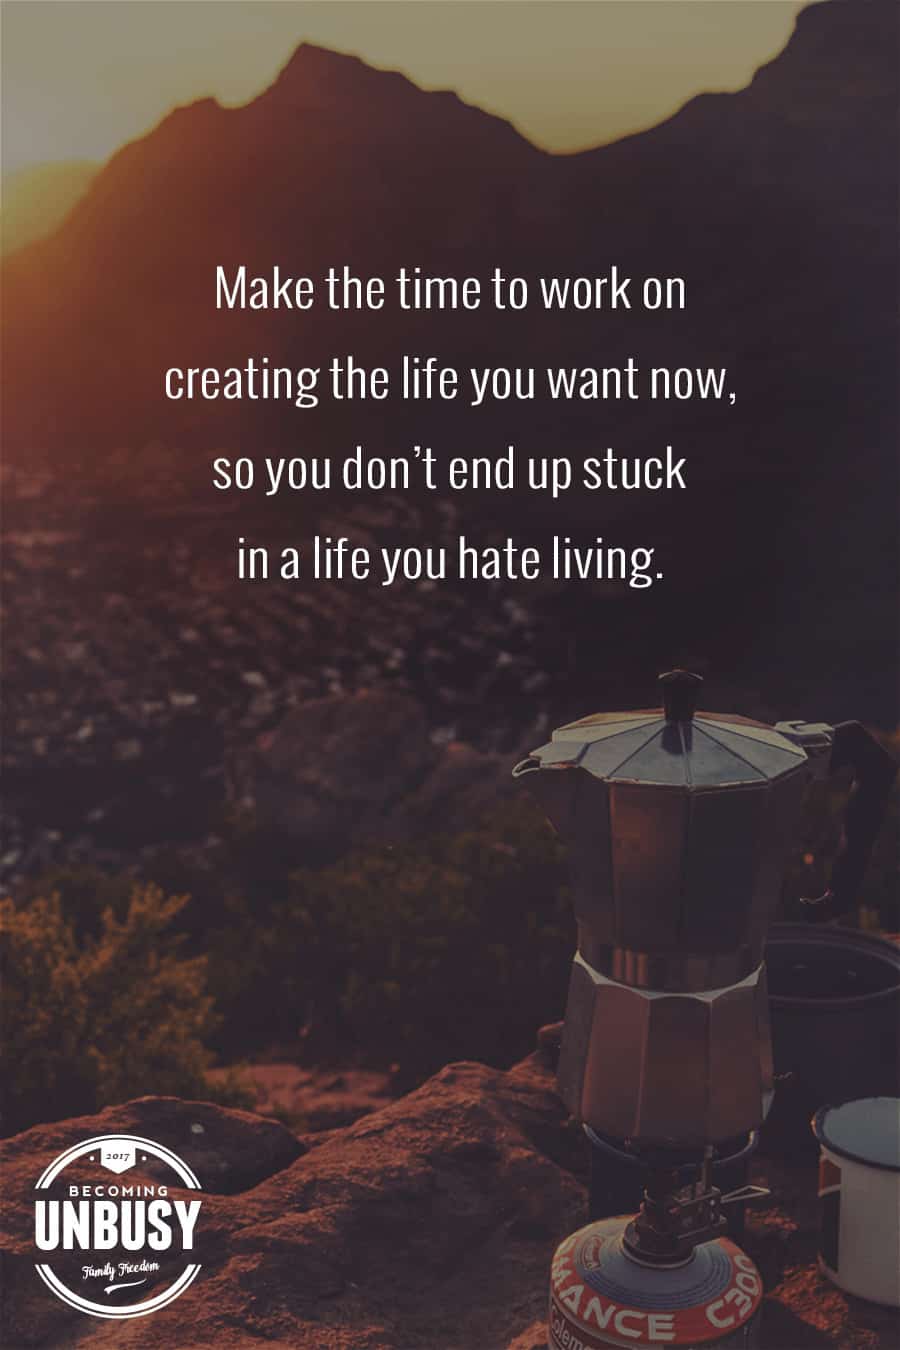 Make the time to work on creating the life you want now, so you don't end up stuck in a life you hate leading. #uncluttered *Own less. Live more. Discover the life you've always wanted.